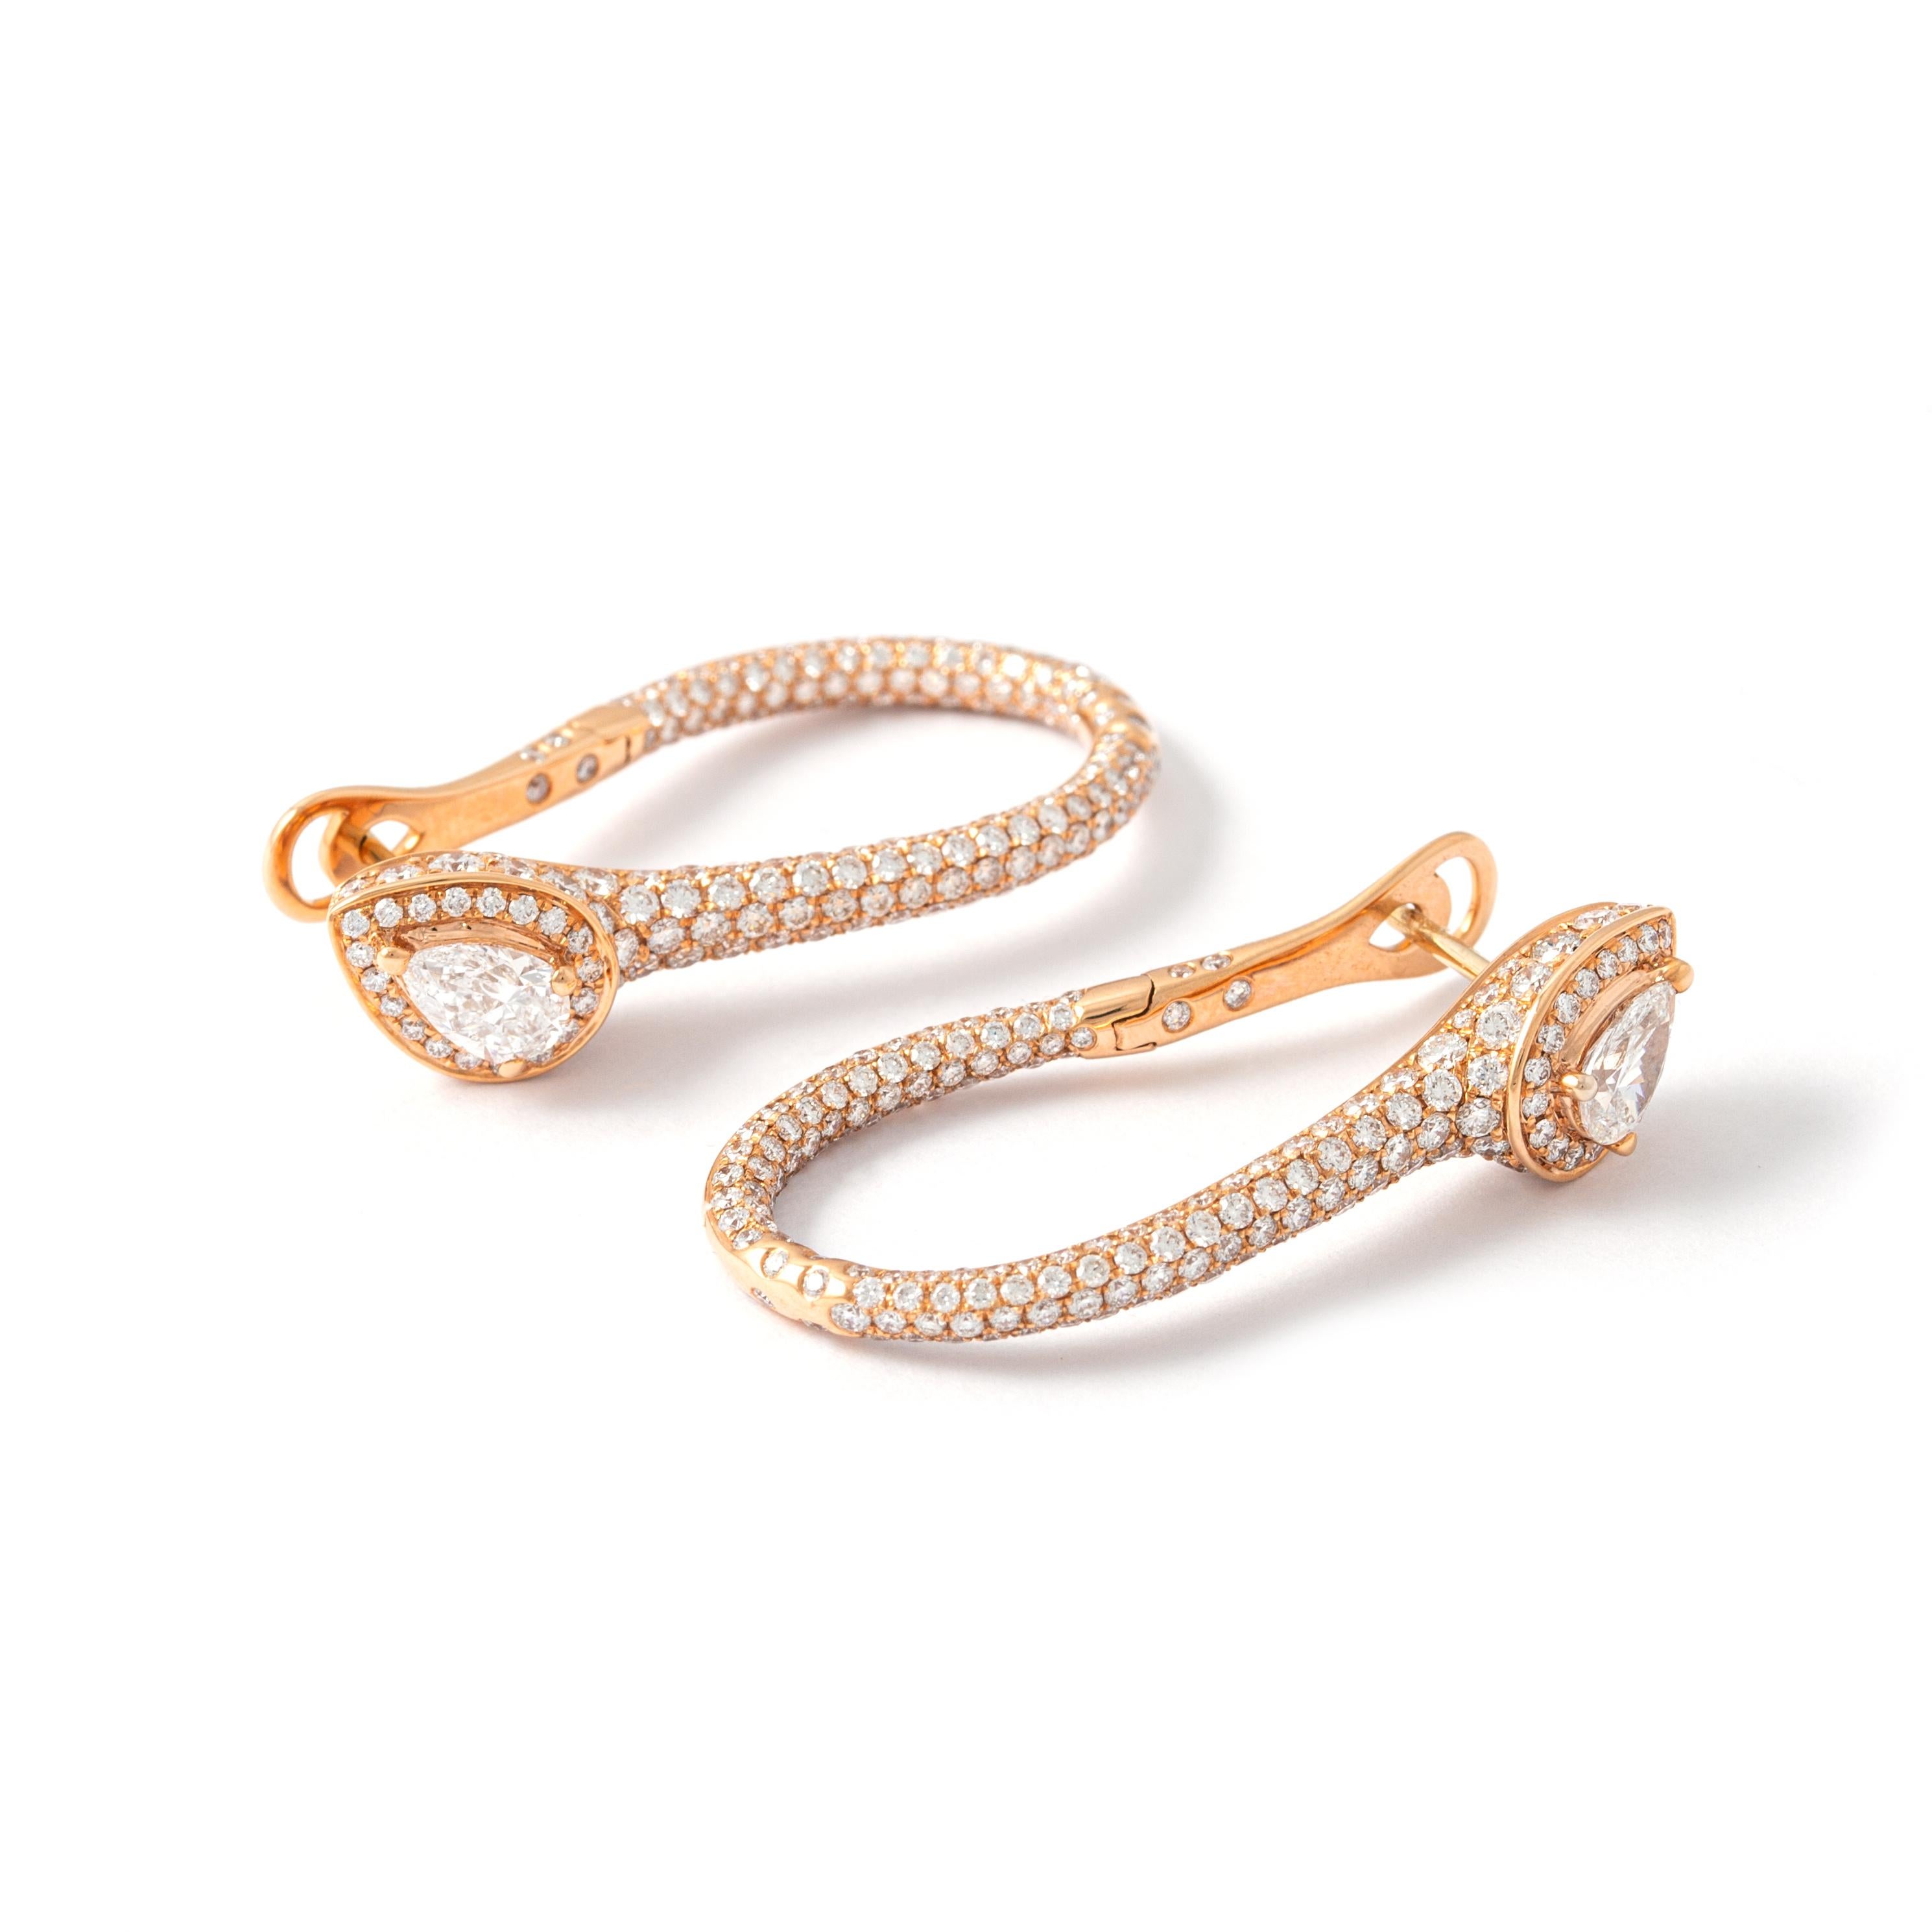 Earrings in 18kt pink gold set with 442 diamonds 3.23 cts and 2 pear-shaped cut diamonds 0.86 cts       